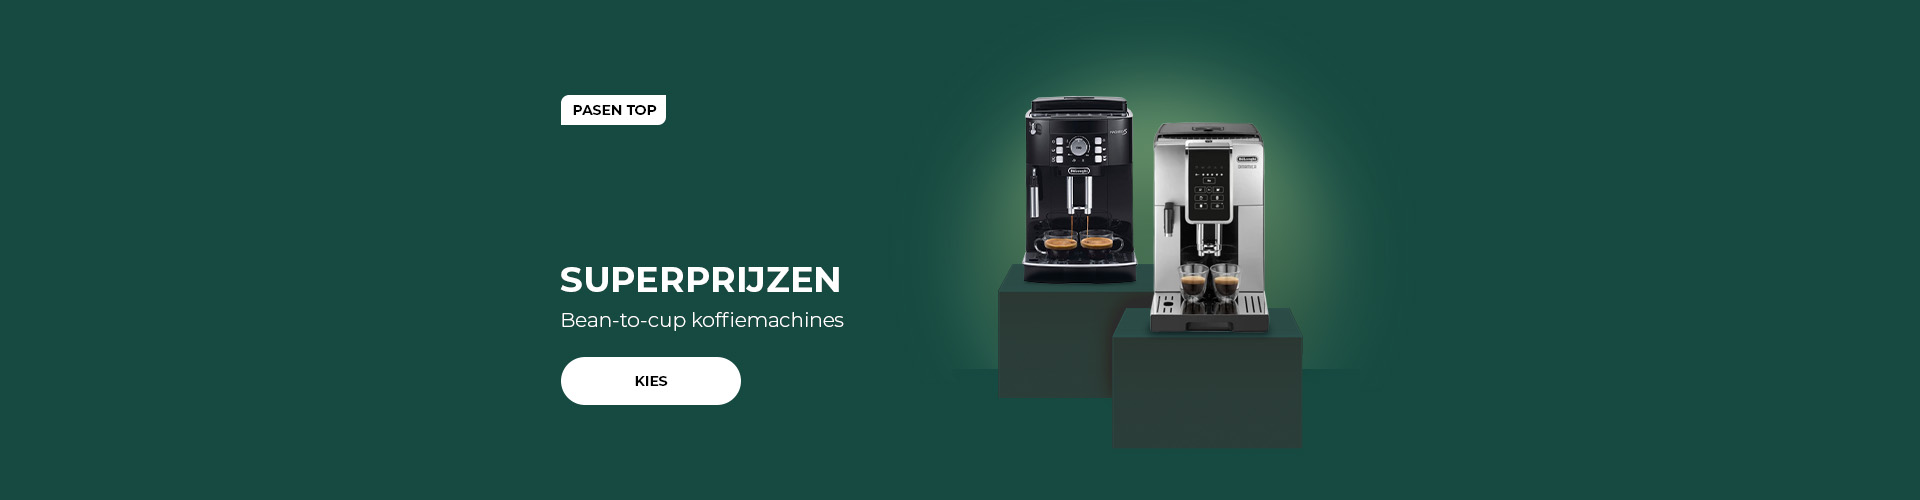 Bean-to-cup koffiemachines